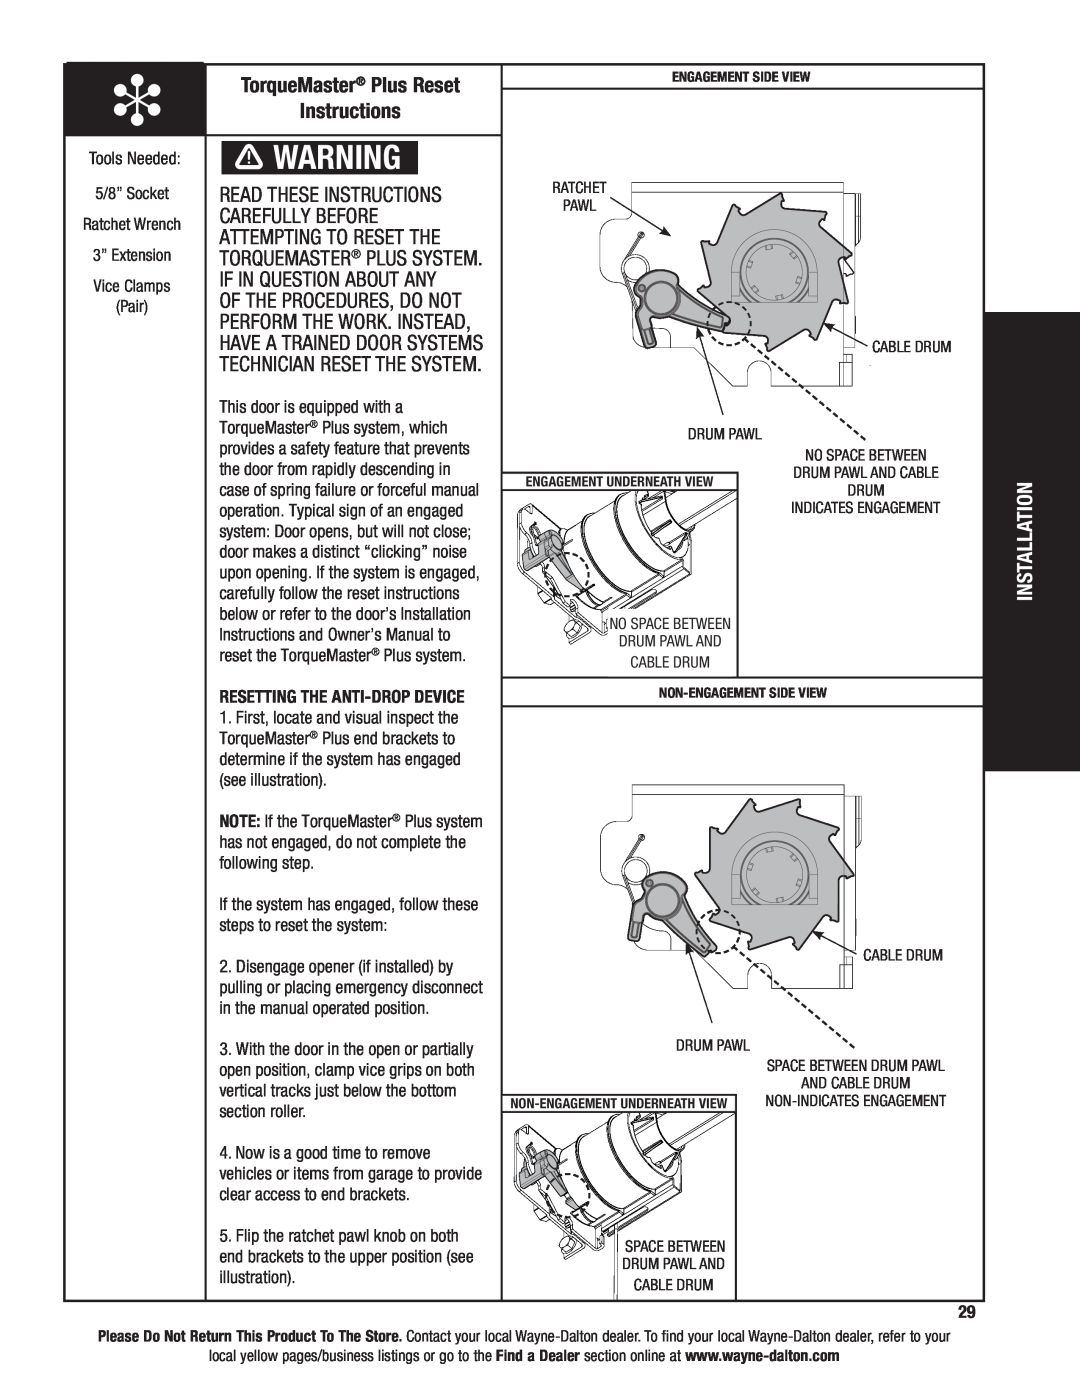 Wayne-Dalton 46 TorqueMaster Plus Reset, Read These Instructions, Carefully Before, Attempting To Reset The 